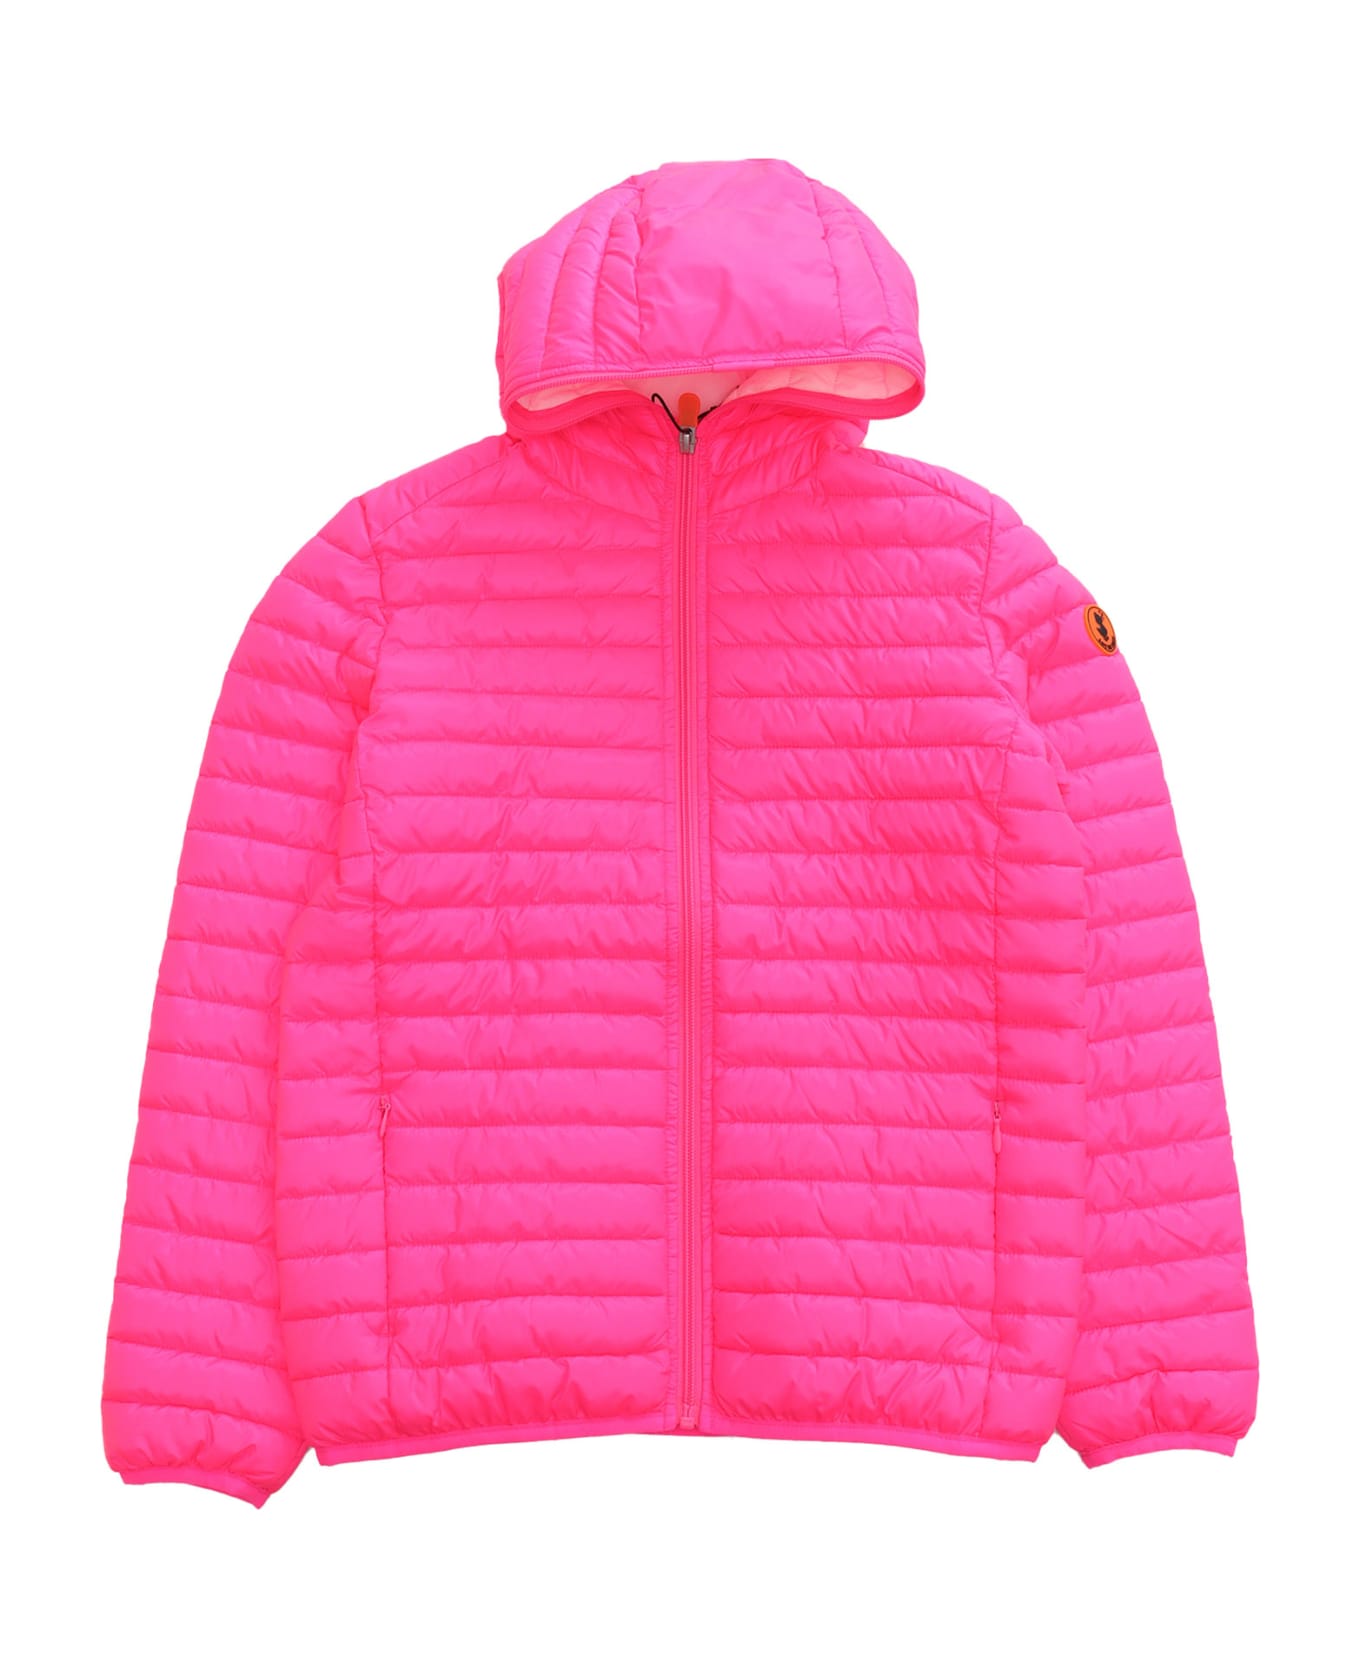 Save the Duck Fluo Hooded Jacket - PINK